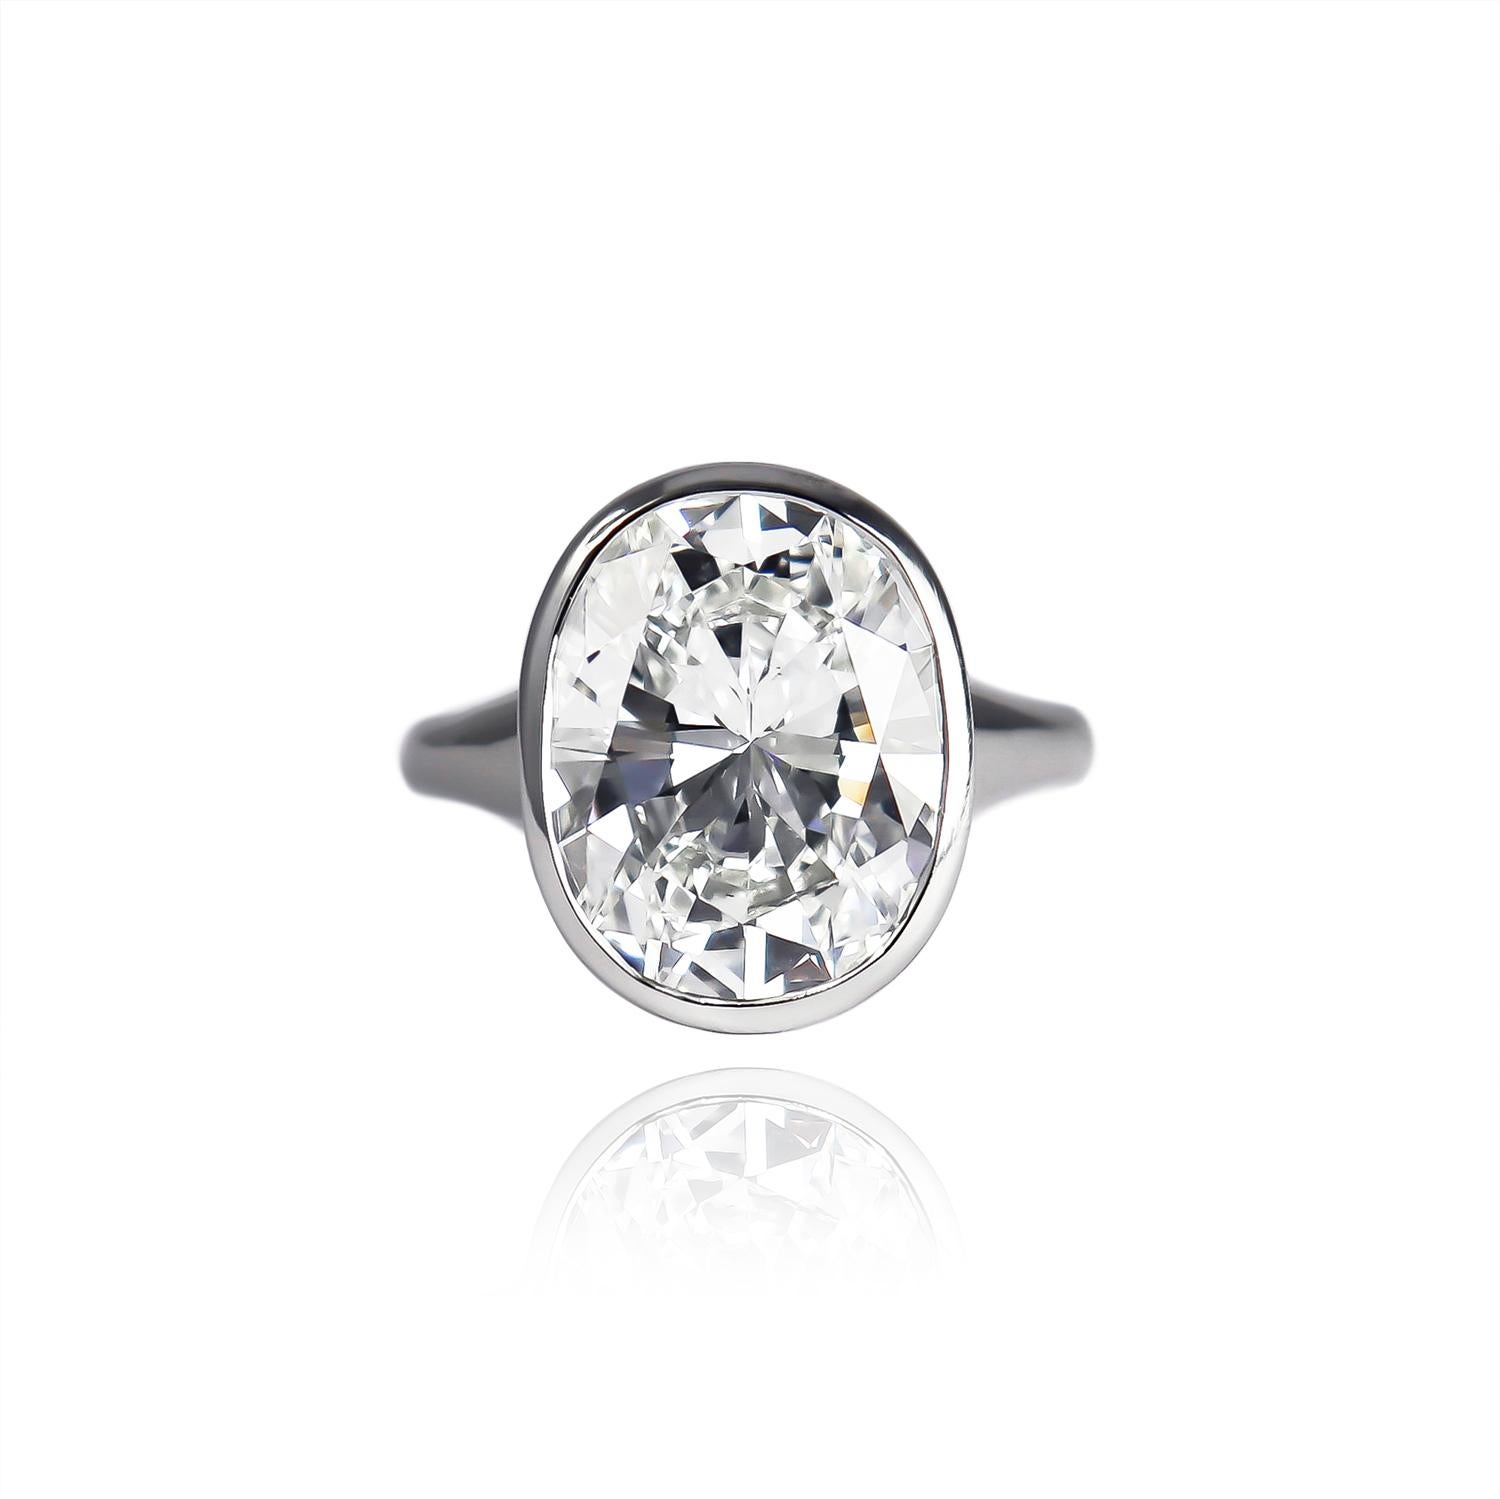 This contemporary and fierce ring from the house of BVLGARI features a GIA certified 6.50 carat oval brilliant cut diamond of H color and VS1 clarity. Set in a refined and crisp bezel mounting, this diamond possesses an elegant and shapely outline